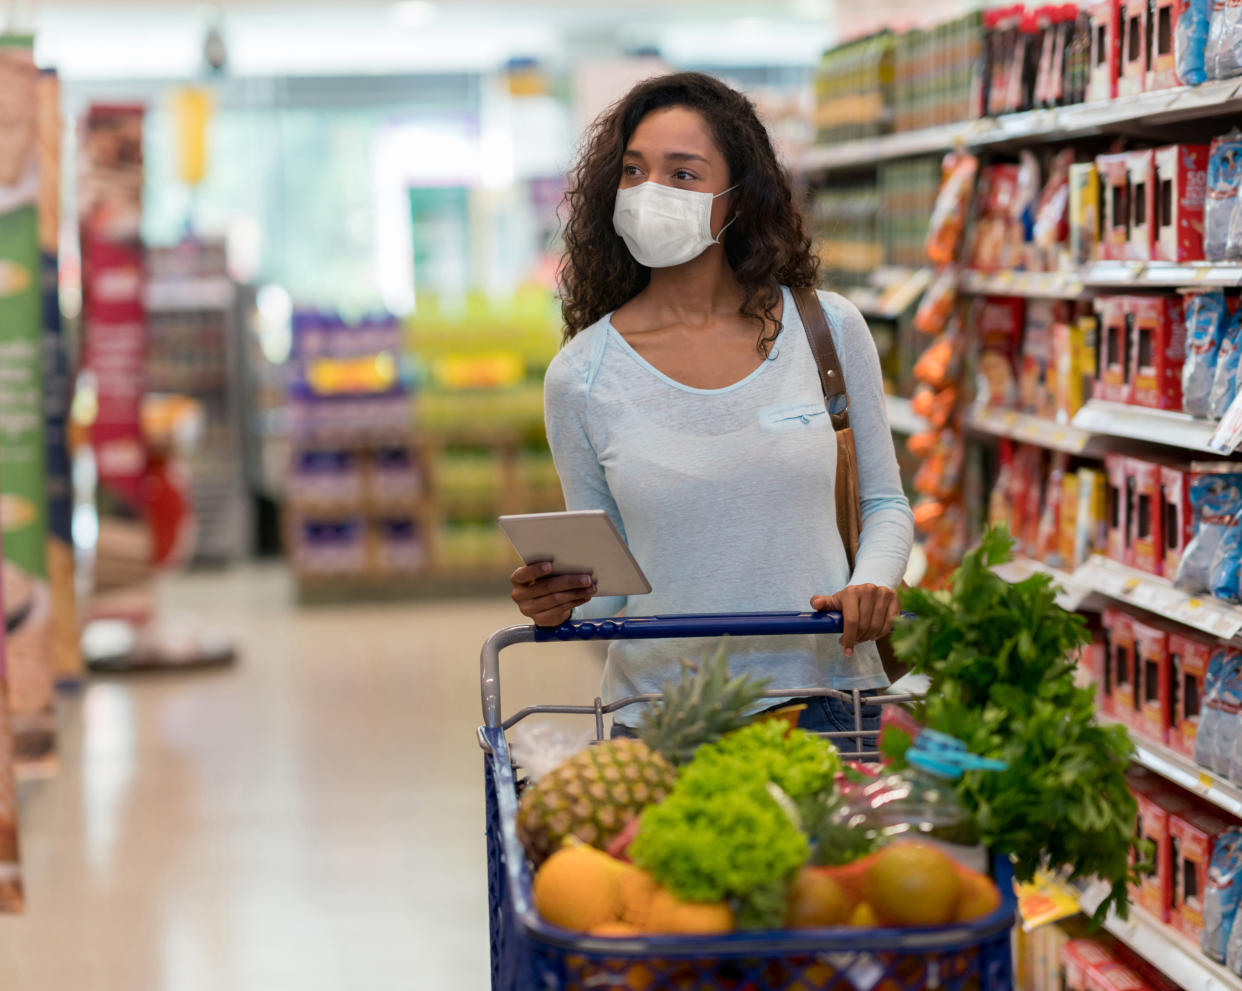 Woman shopping at the supermarket wearing a facemask to avoid the coronavirus while following a list on her tablet computer â COVID-19 lifestyle concepts  